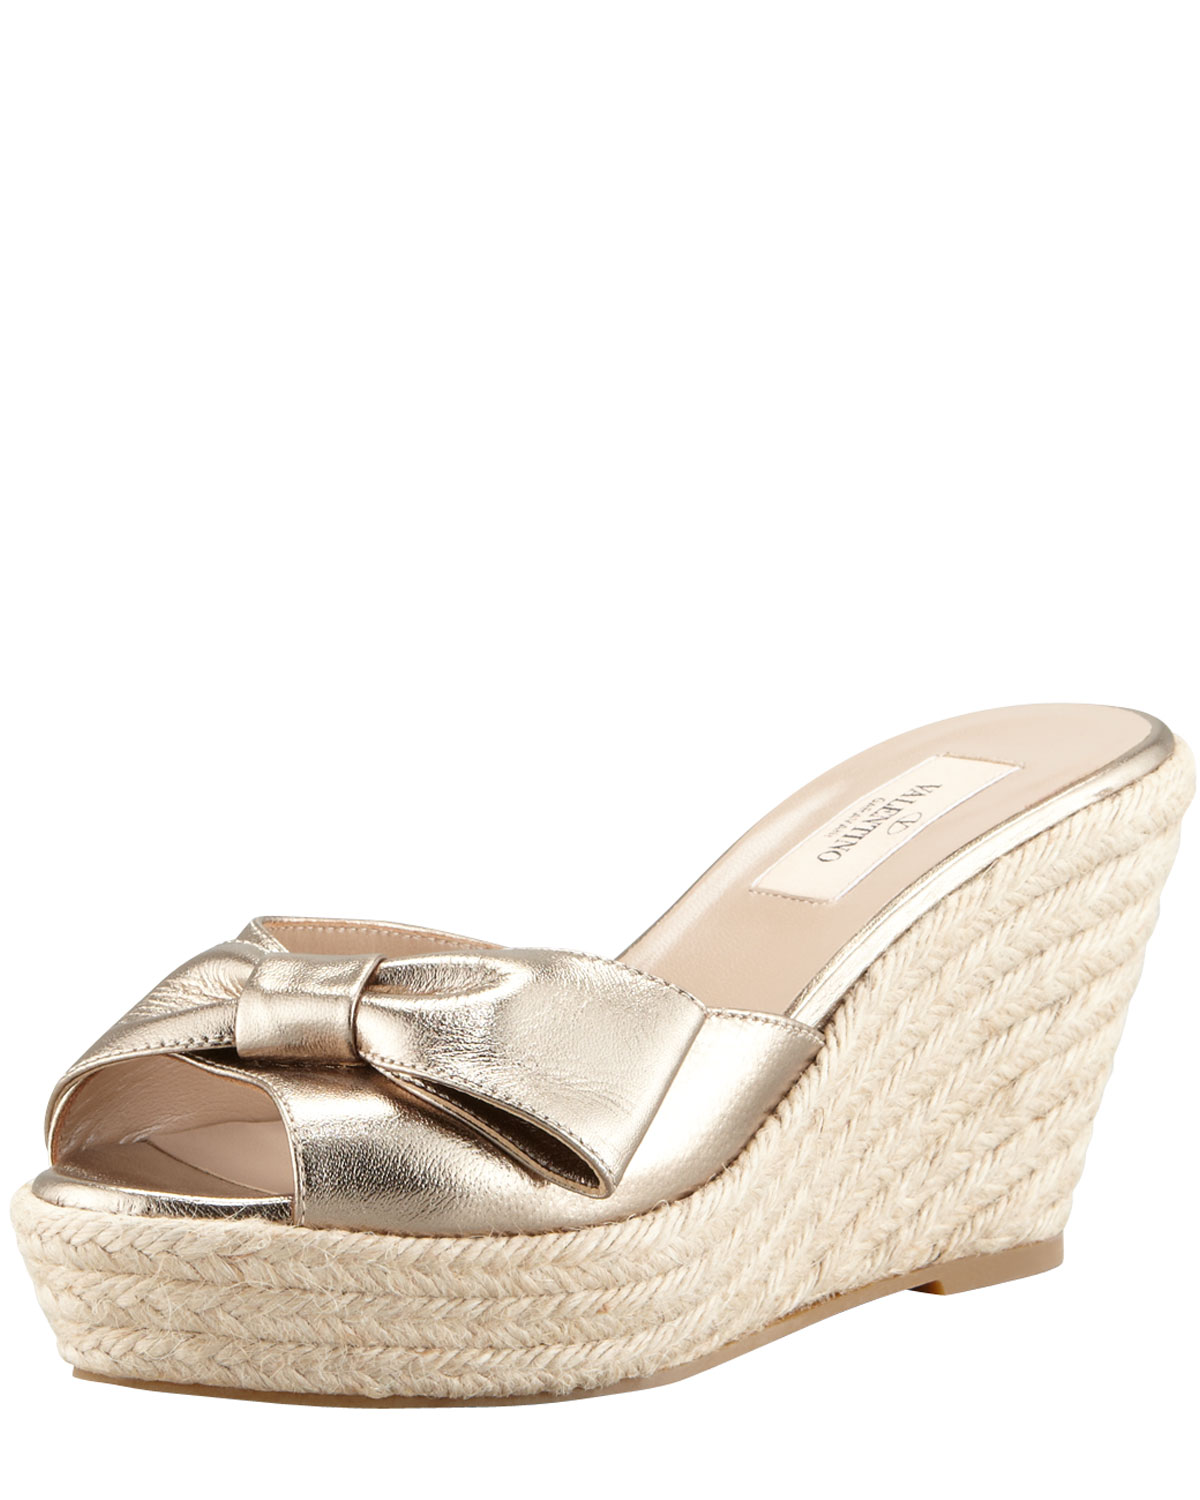 Valentino Metallic Leather Bow Espadrille Slide in Gold | Lyst